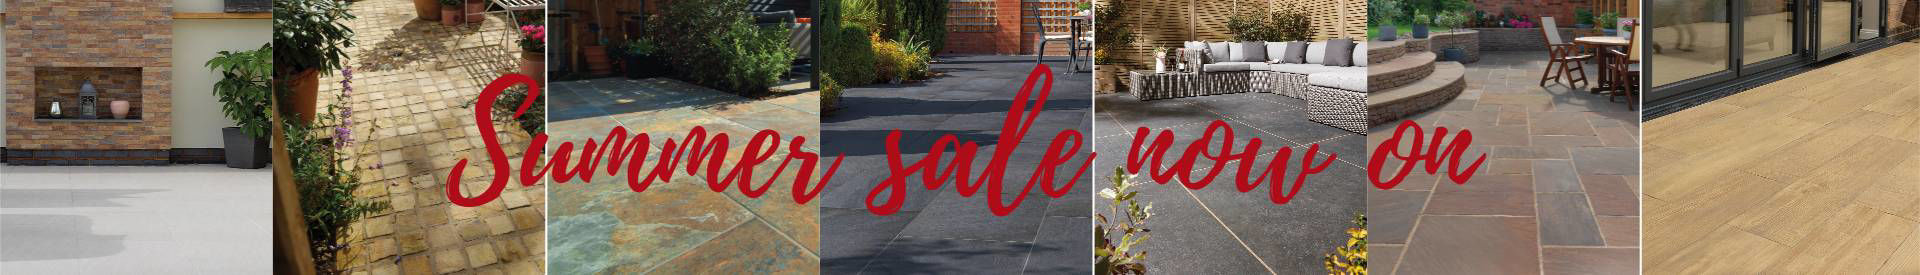 Paving Sale Now On